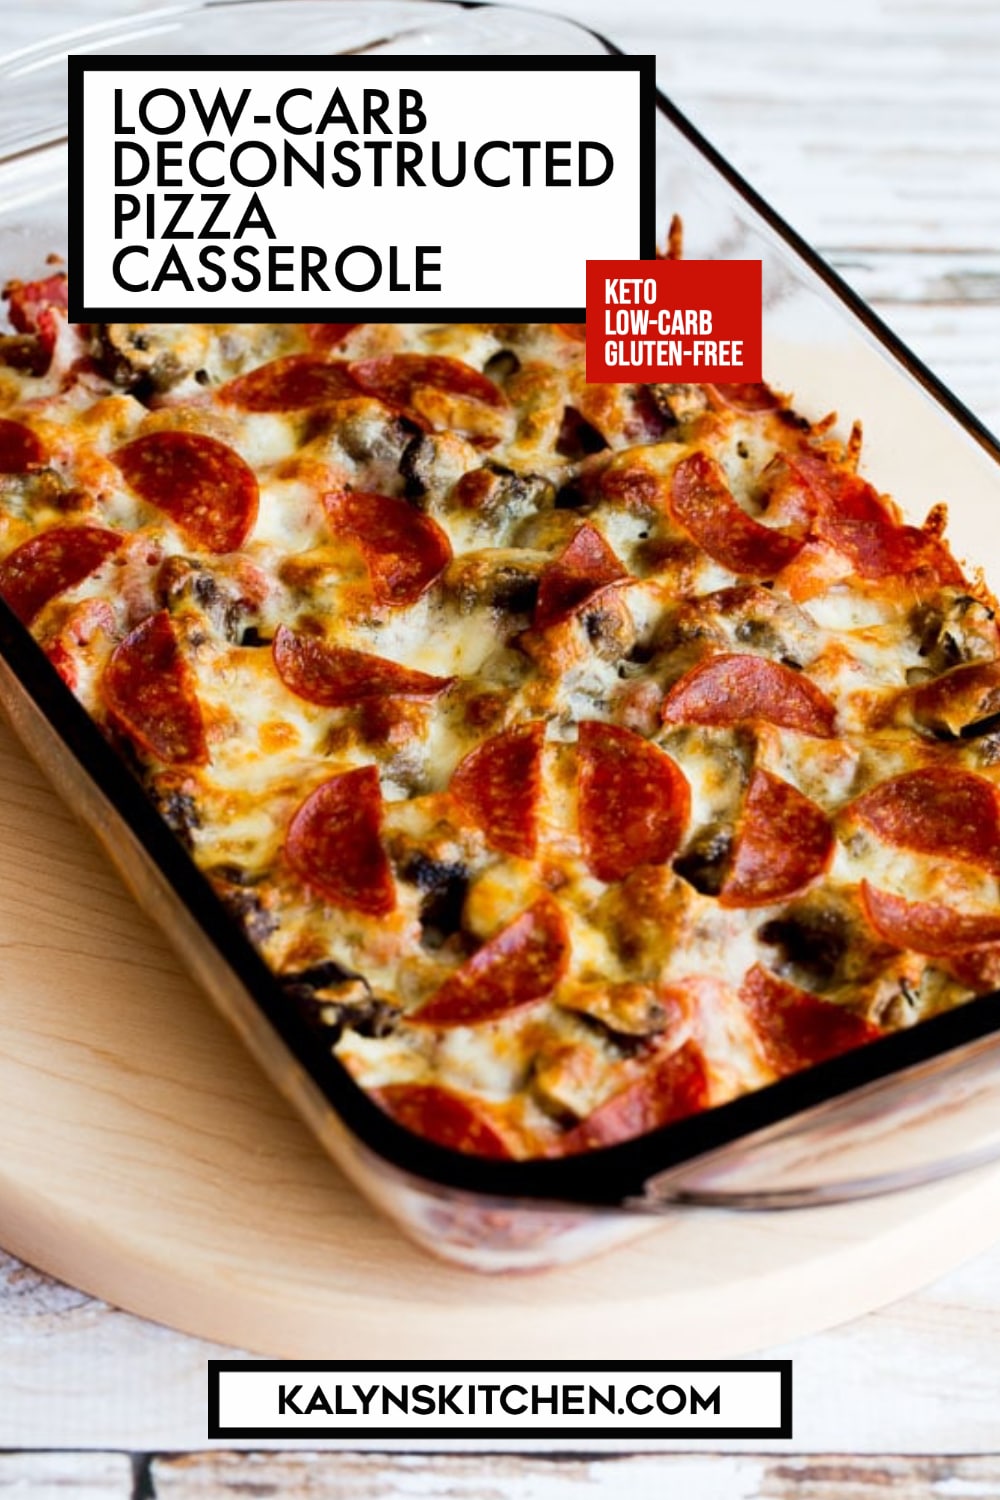 Pinterest image of Low-Carb Deconstructed Pizza Casserole